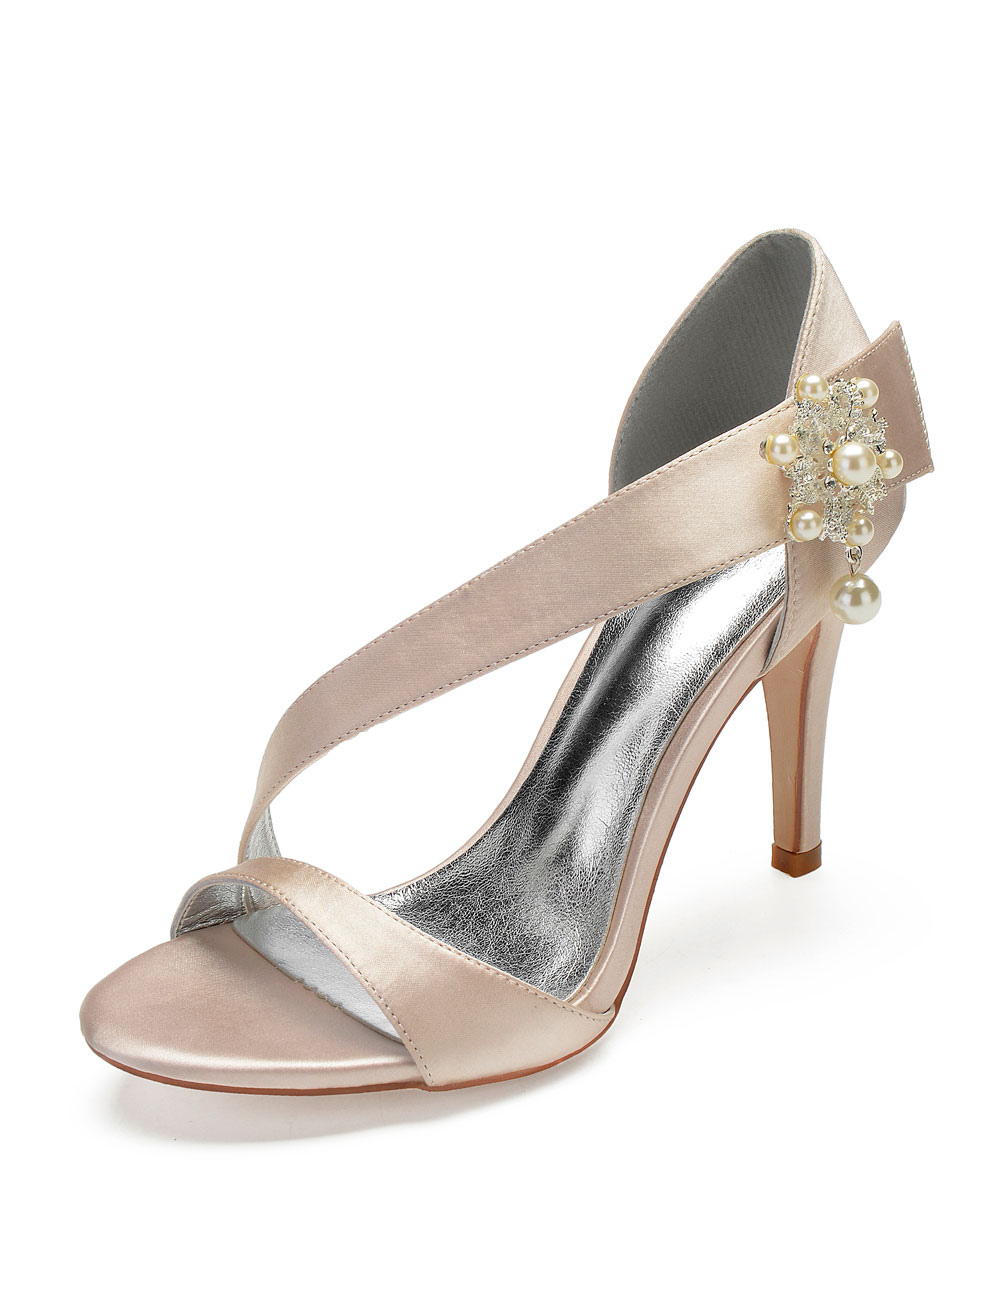 Satin Wedding Shoes Champagne Open Toe 